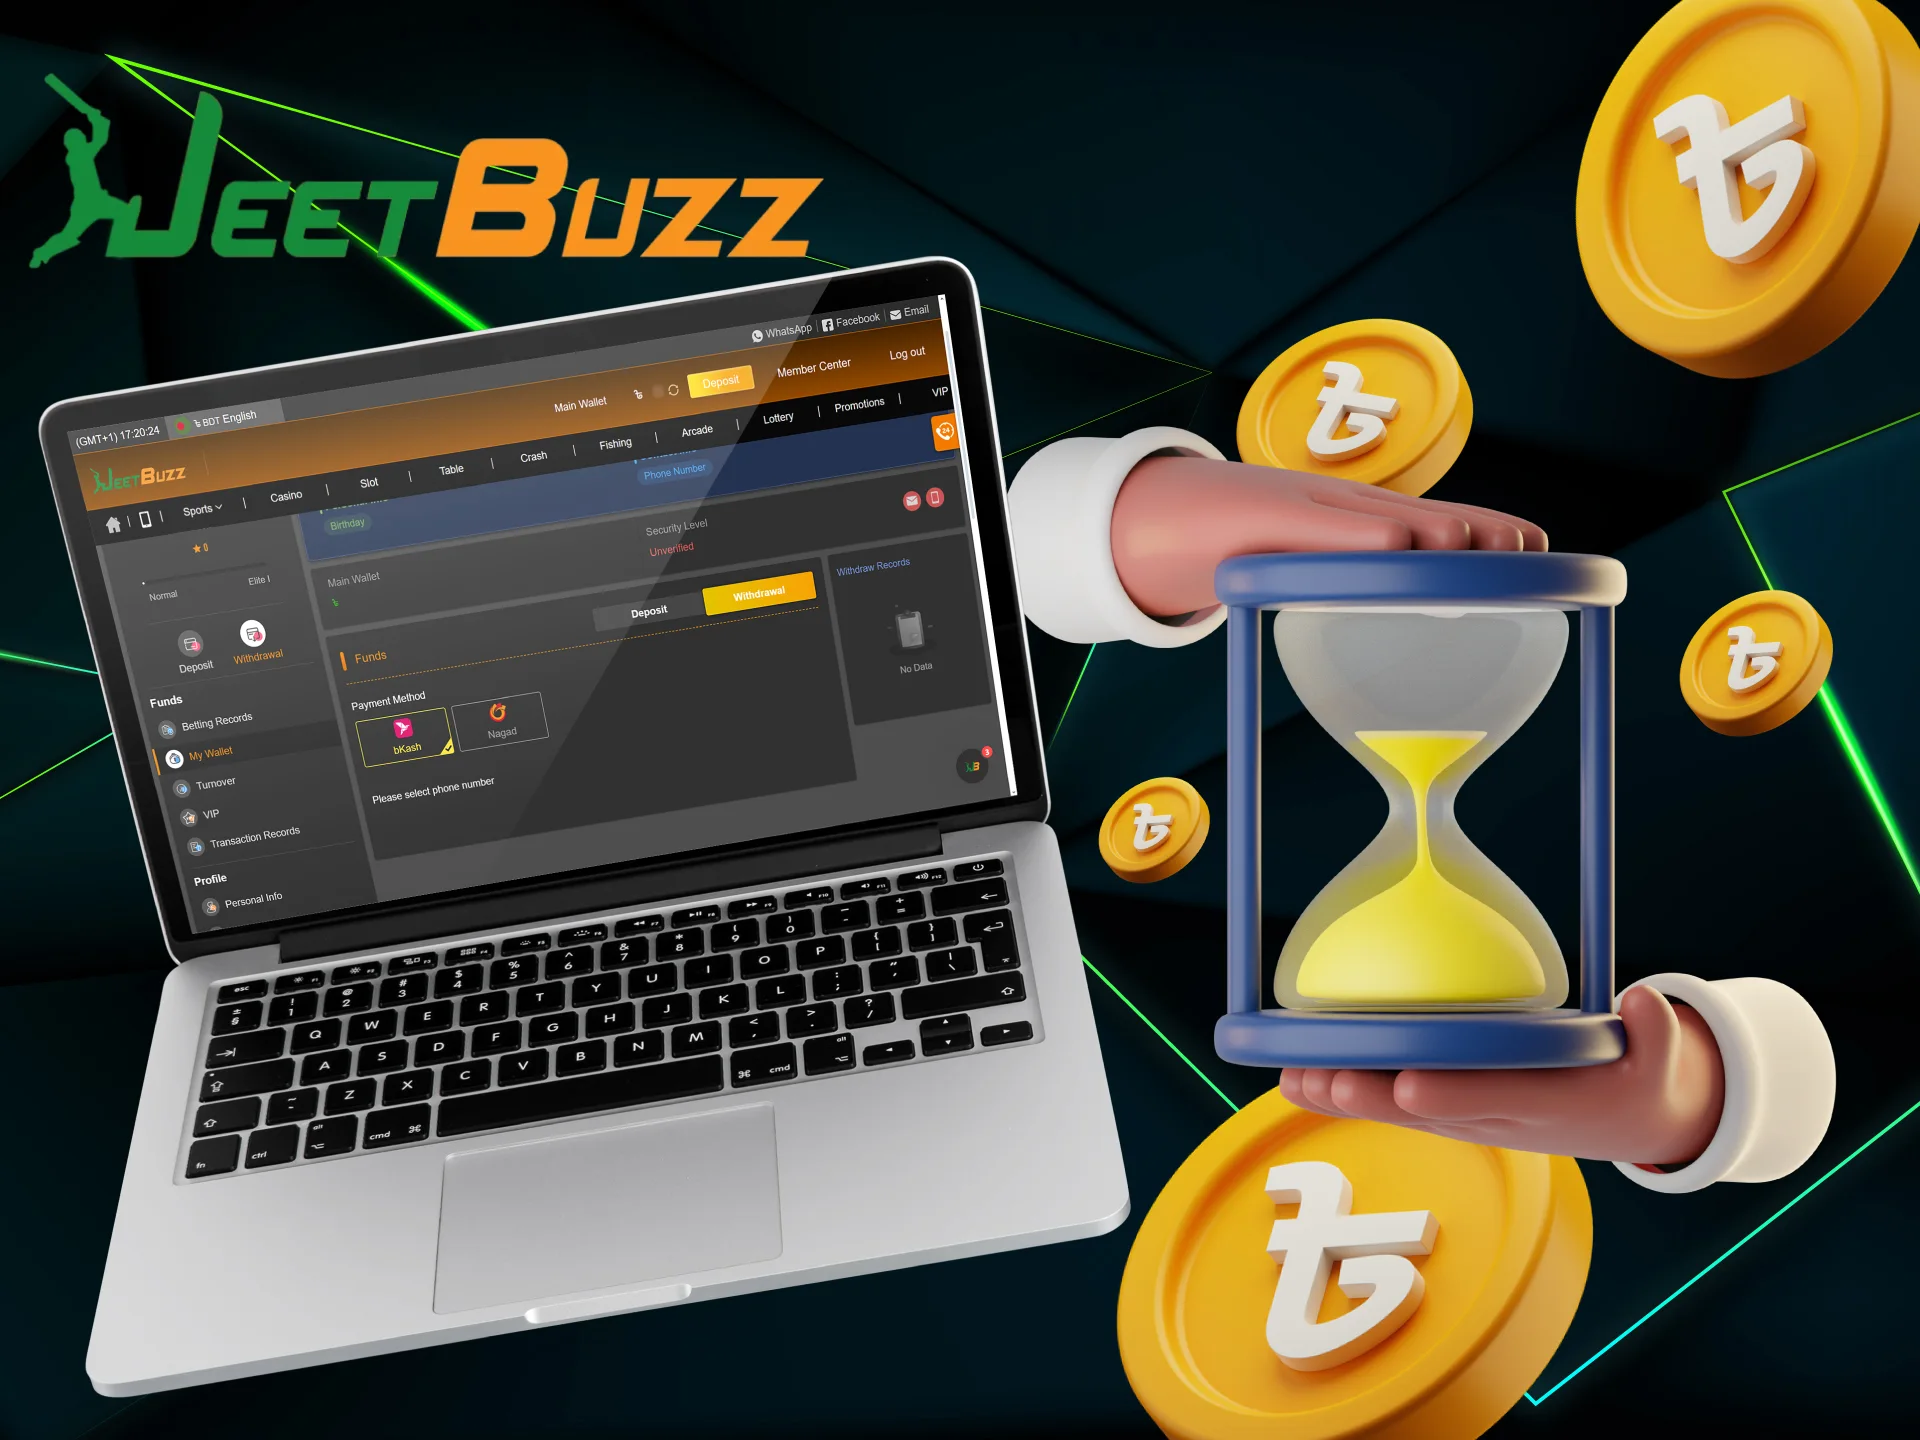 Withdrawals on JeetBuzz can take 15-30 minutes.